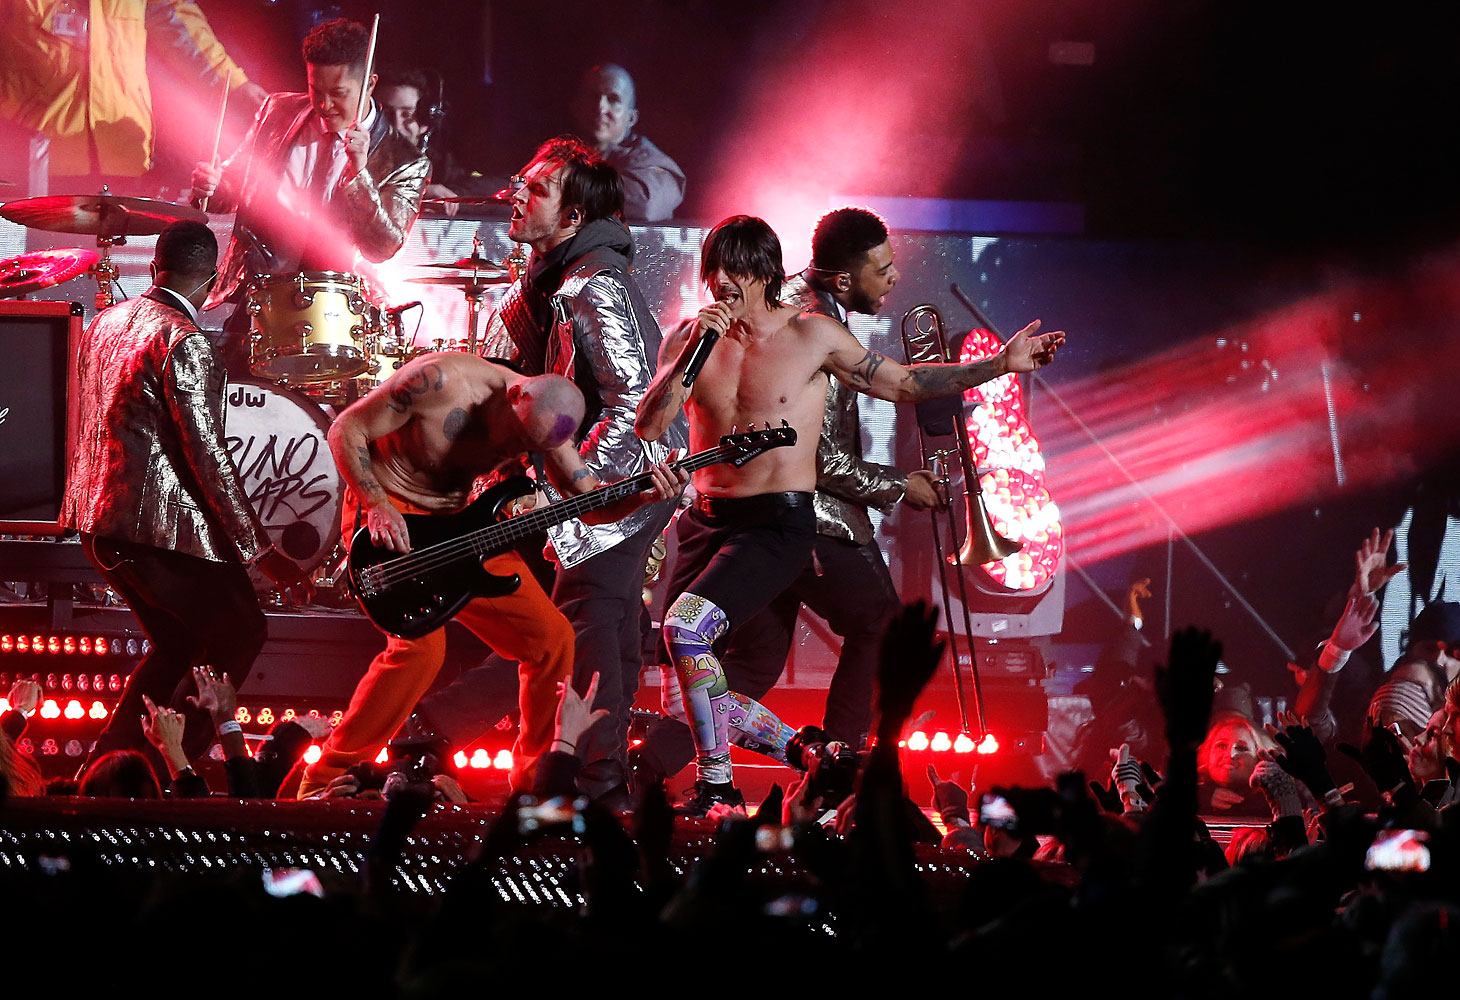 The Red Hot Chili Peppers perform during the halftime show of the NFL Super Bowl XLVIII football game between the Seattle Seahawks and the Denver Broncos Sunday, Feb. 2, 2014, in East Rutherford, N.J.